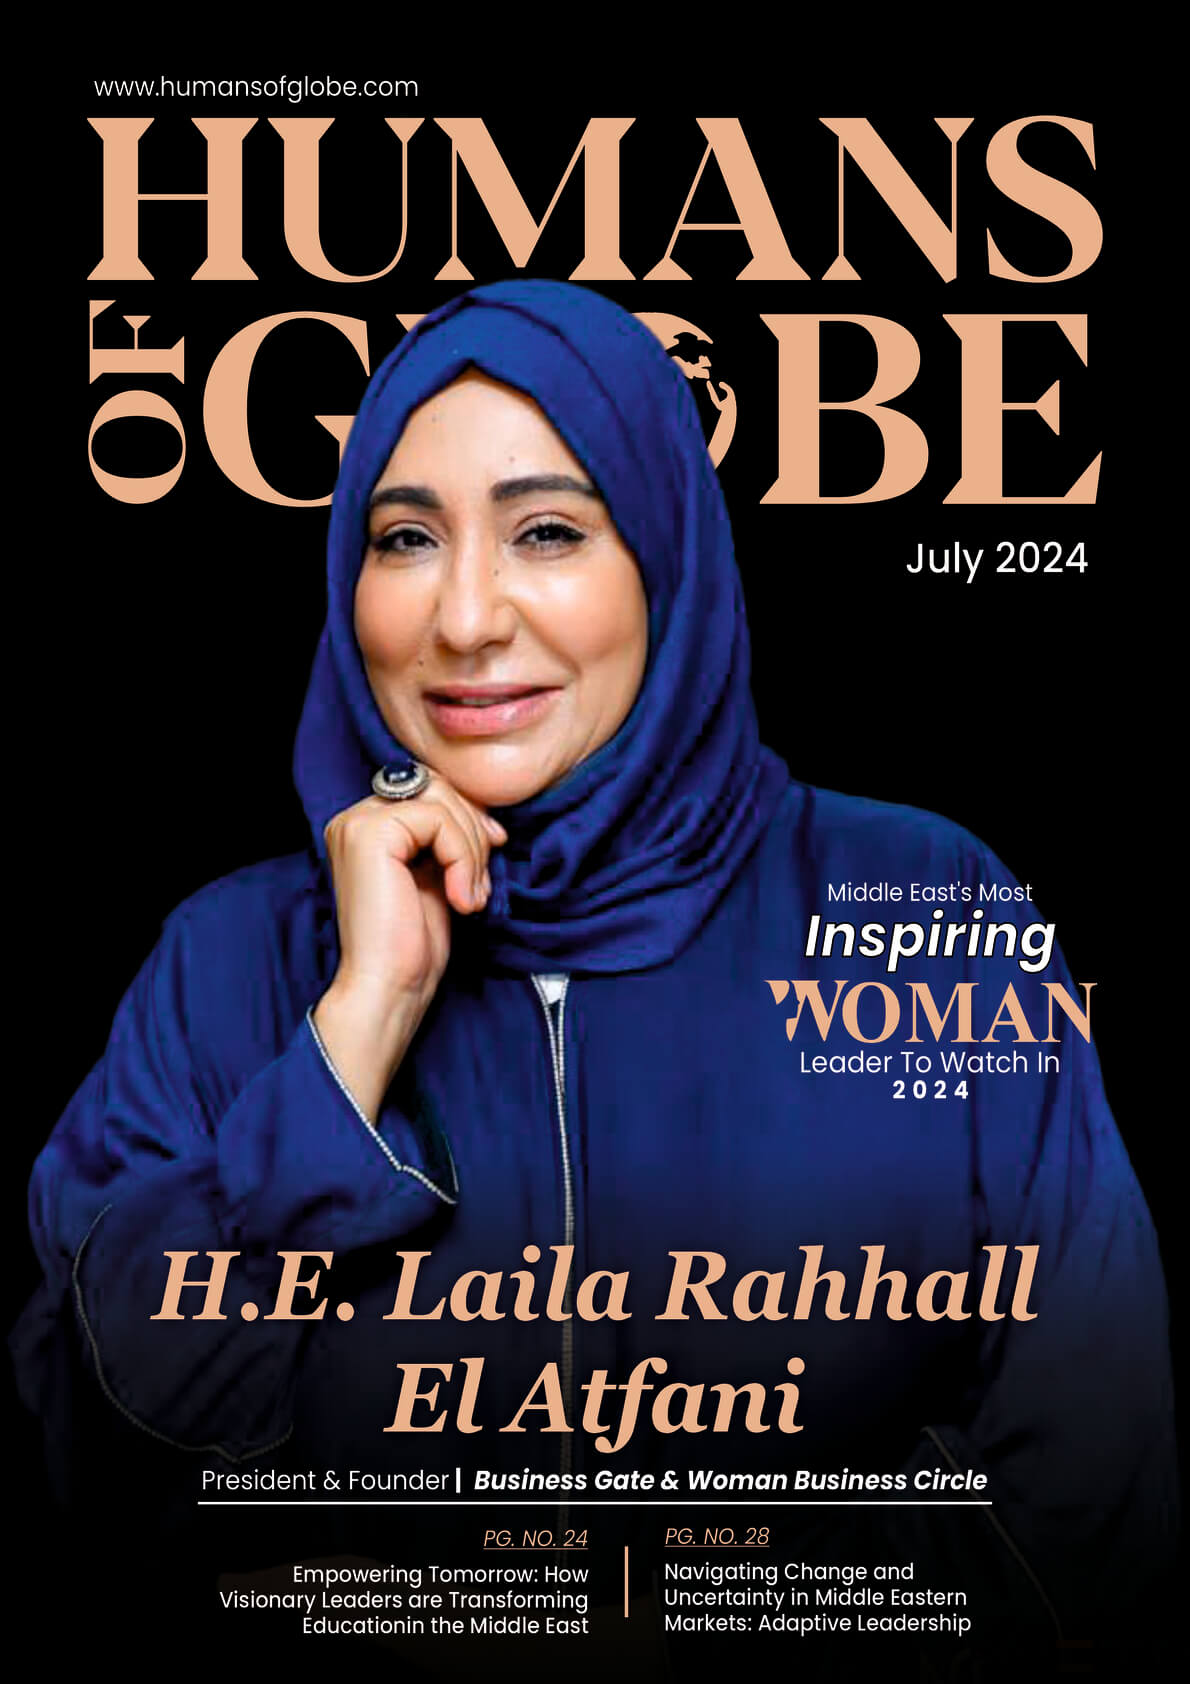 Middle East’s Most Inspiring Woman Leader to Watch in 2024